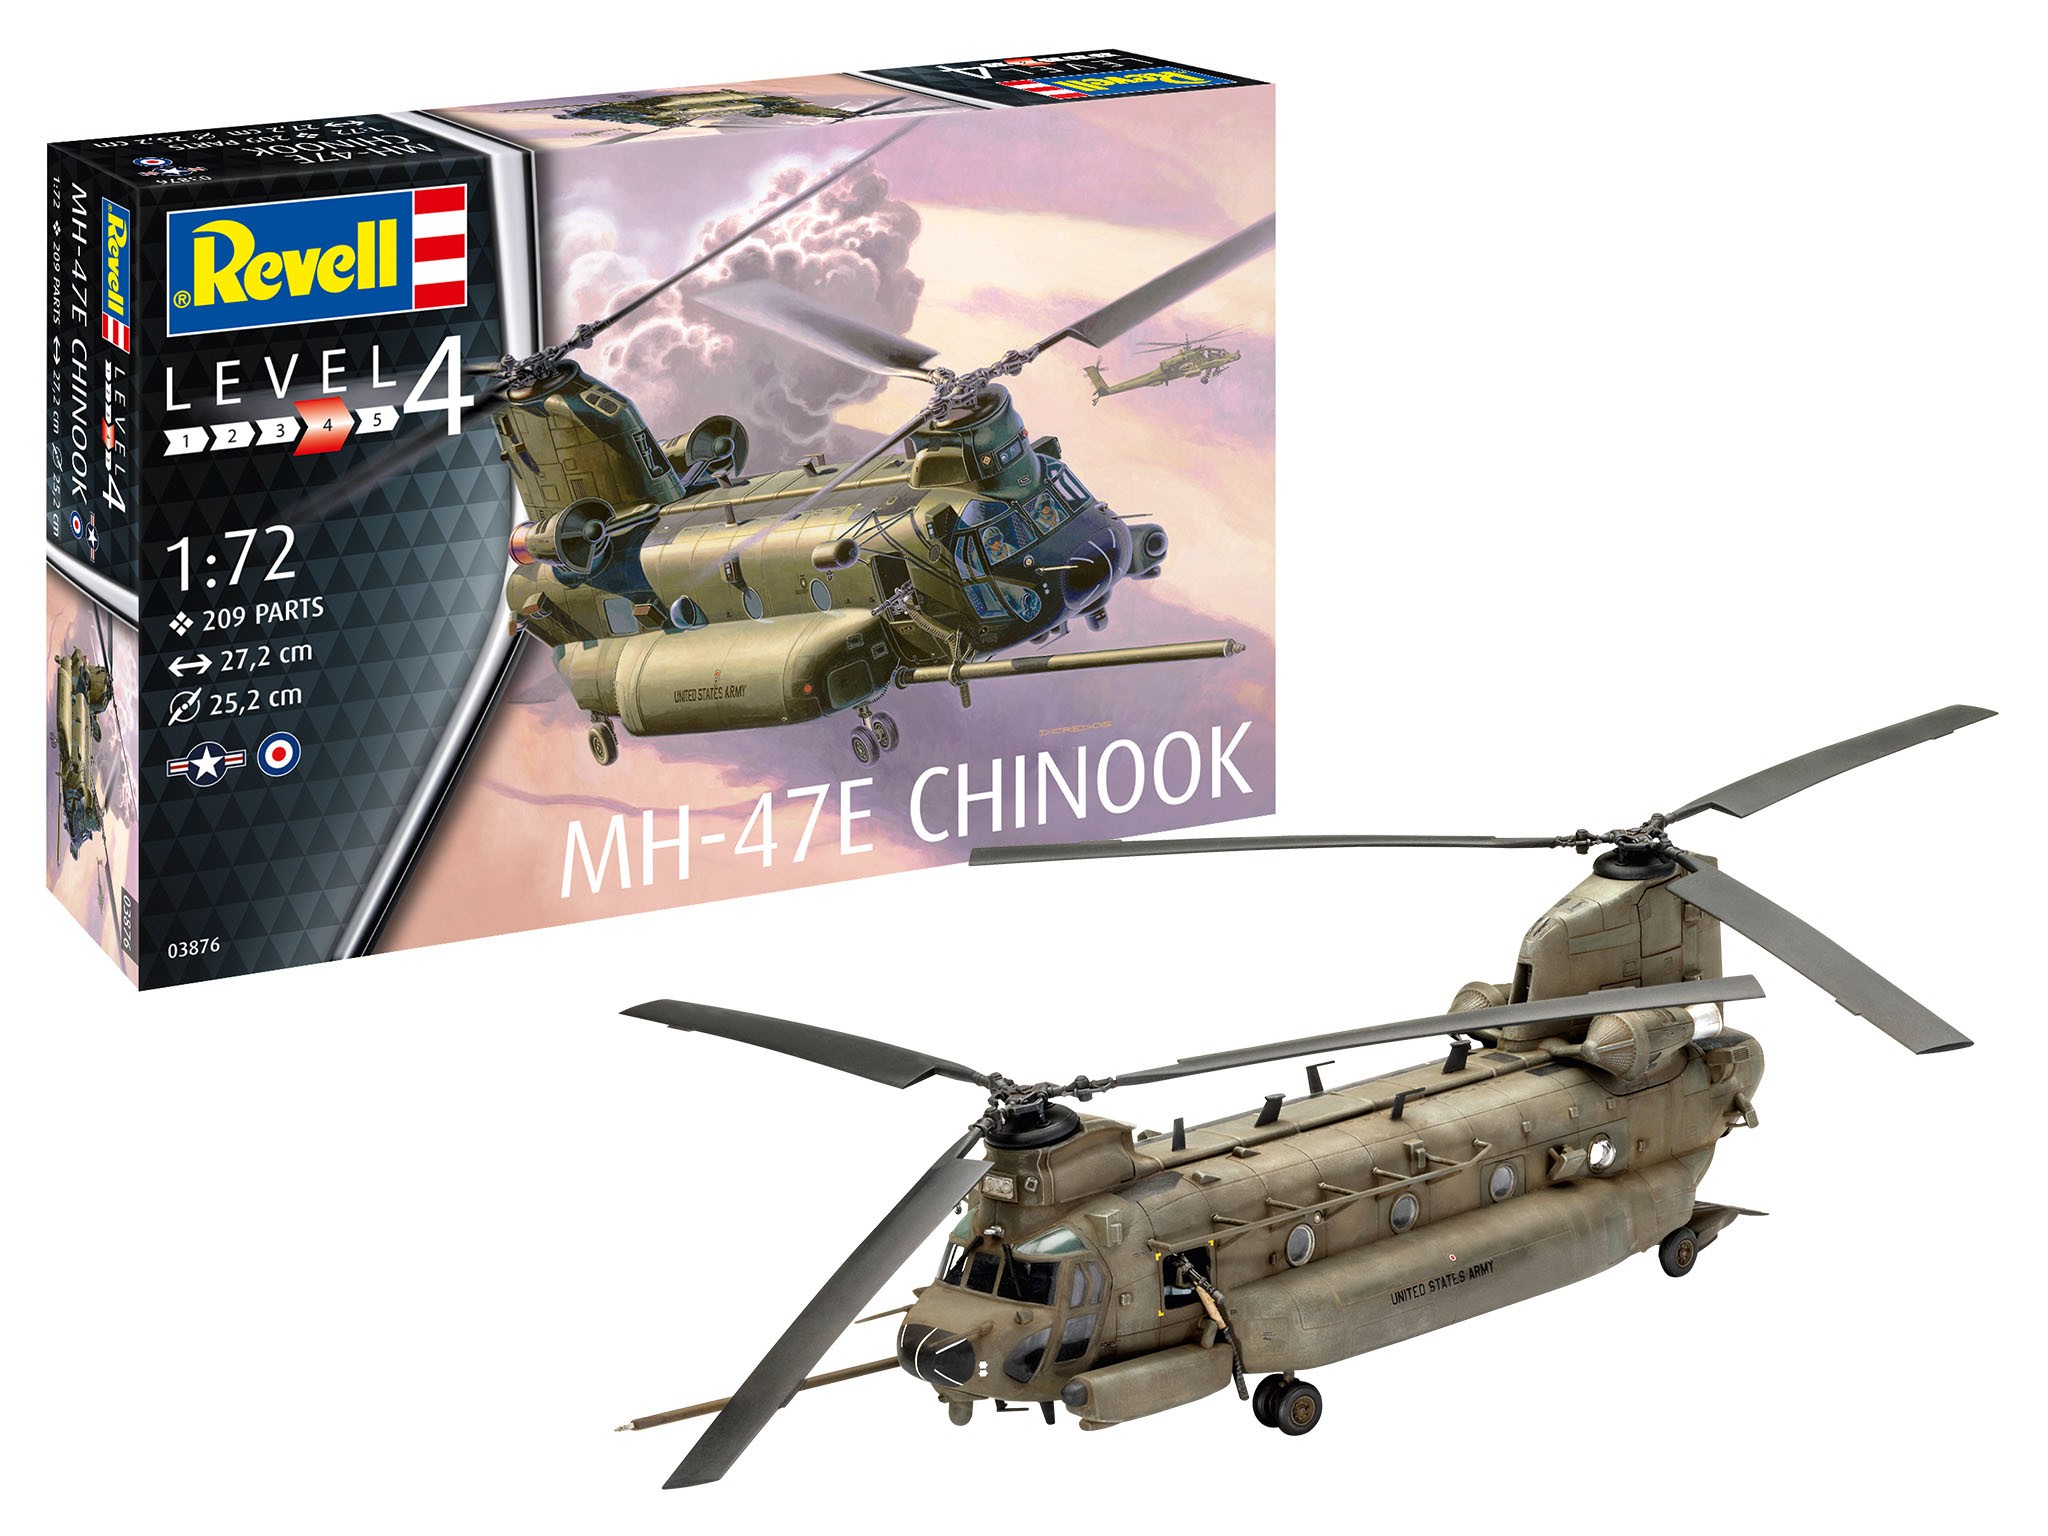 Revell 03876 MH-47E Chinook  1:72